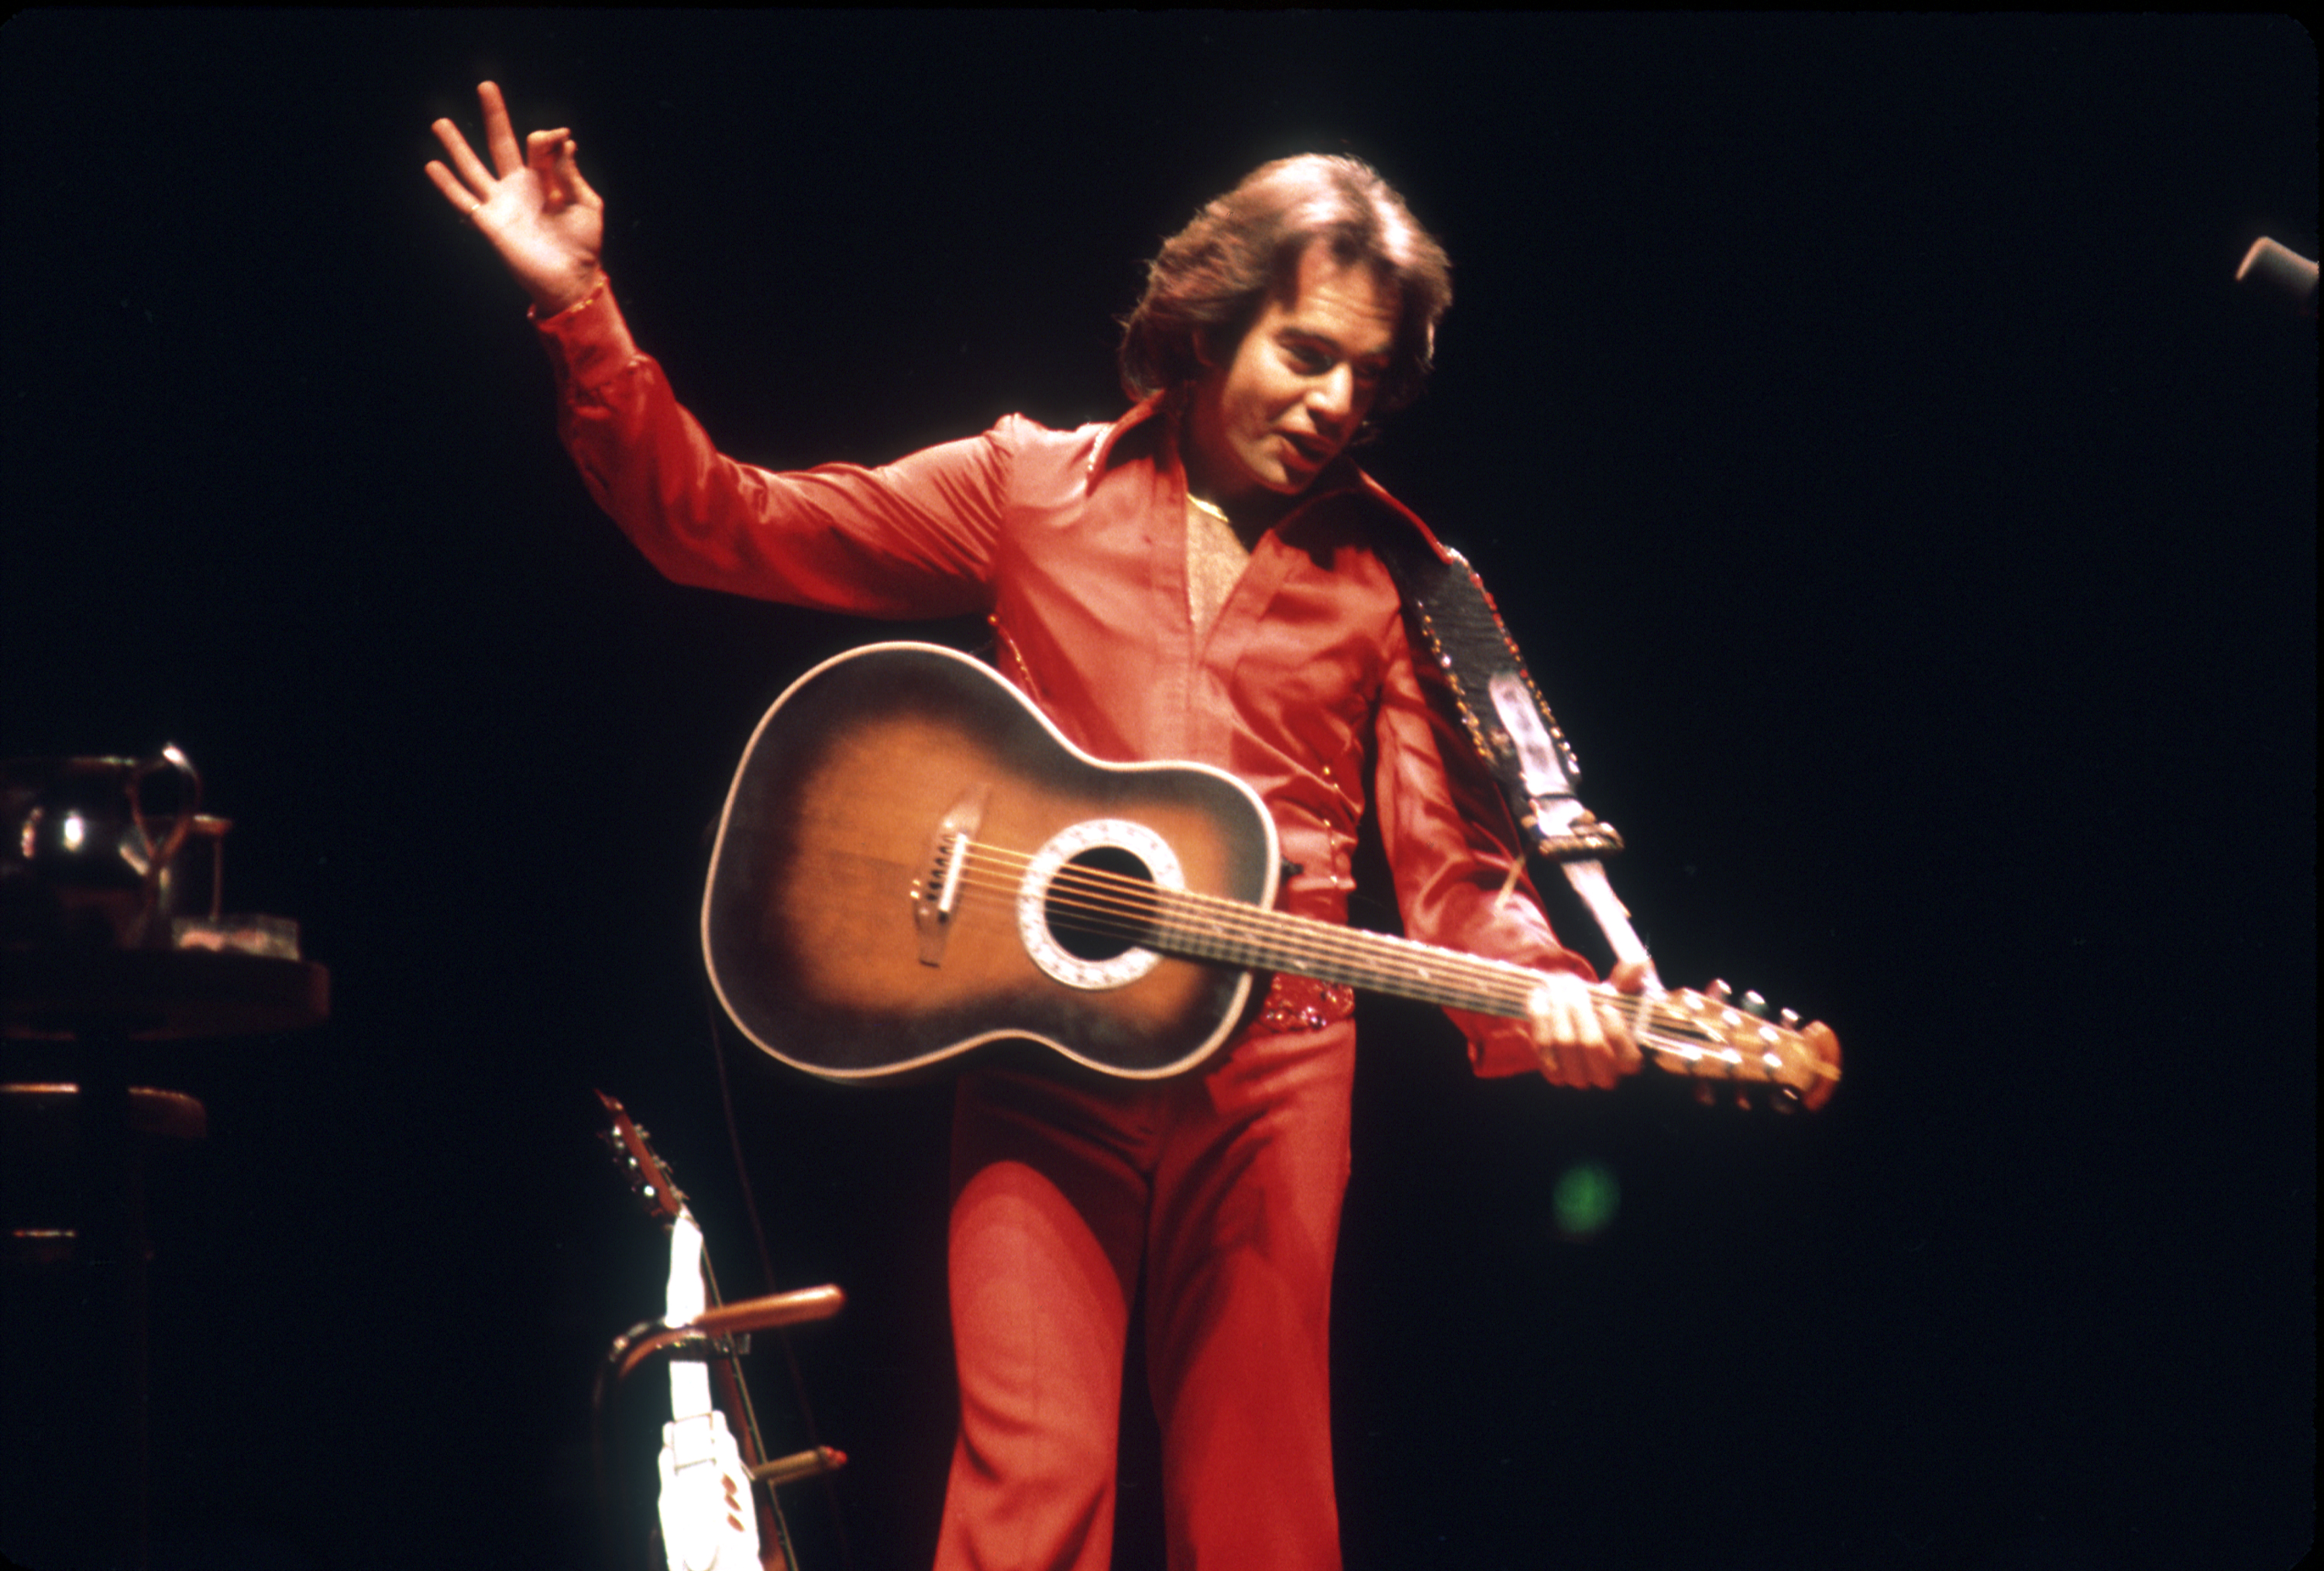 Singer Neil Diamond performs onstage wearing a red jumpsuit on January 1, 1980 in Los Angeles, California | Source: Getty Images